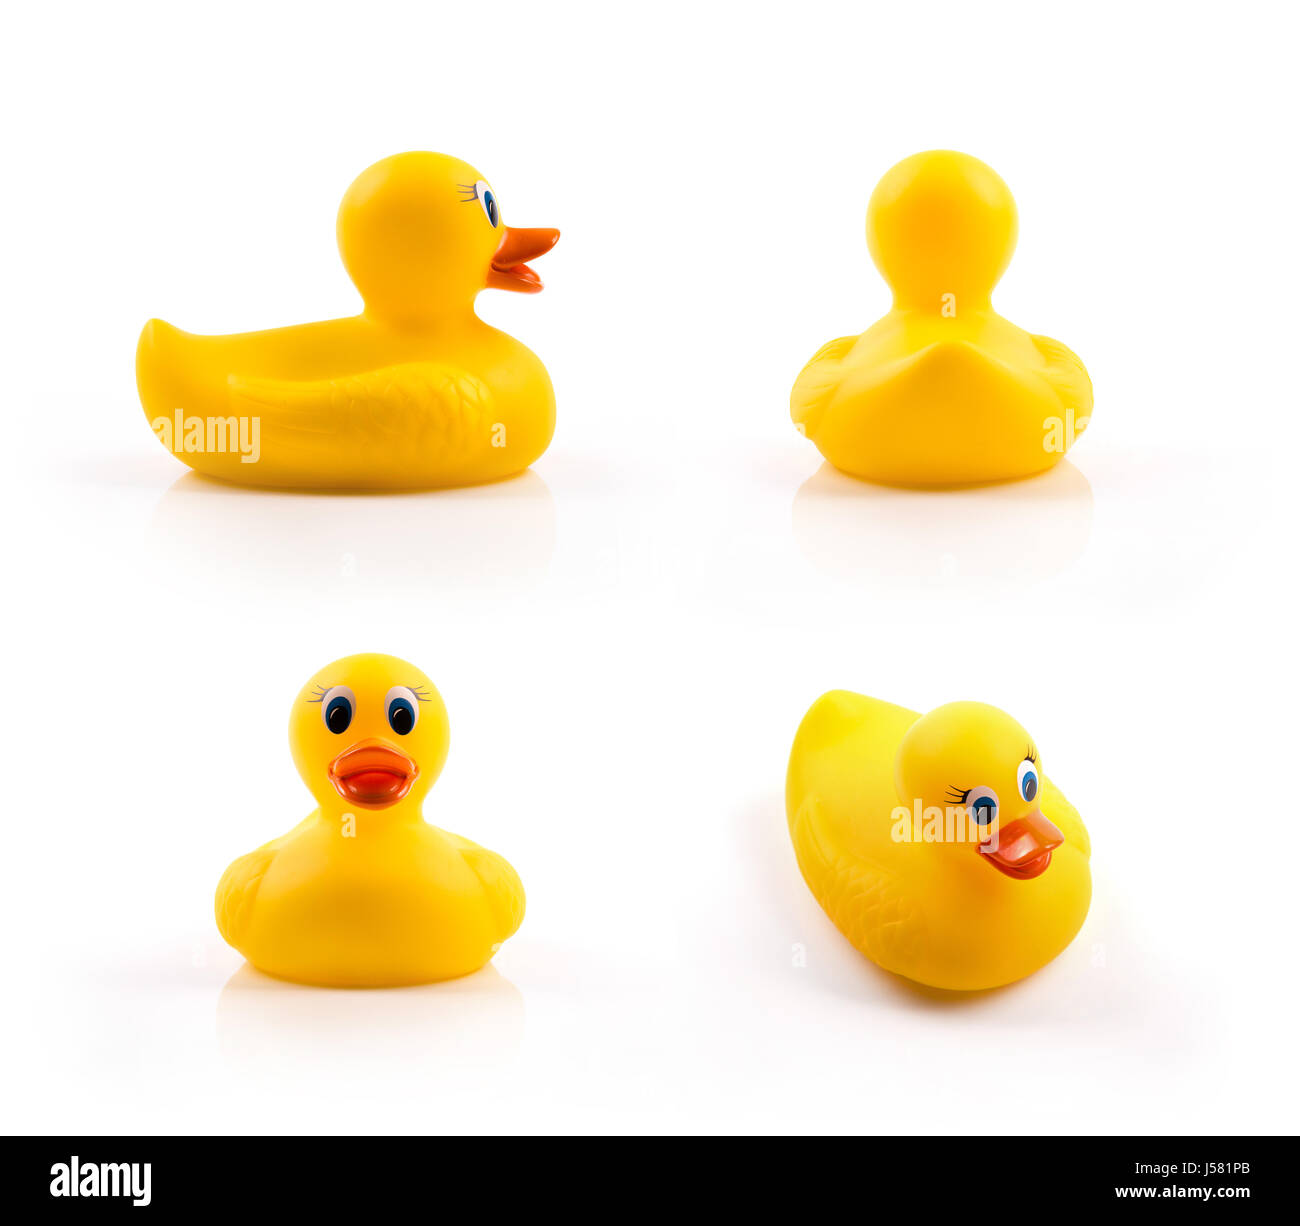 yellow rubber duck isolated on white background Stock Photo